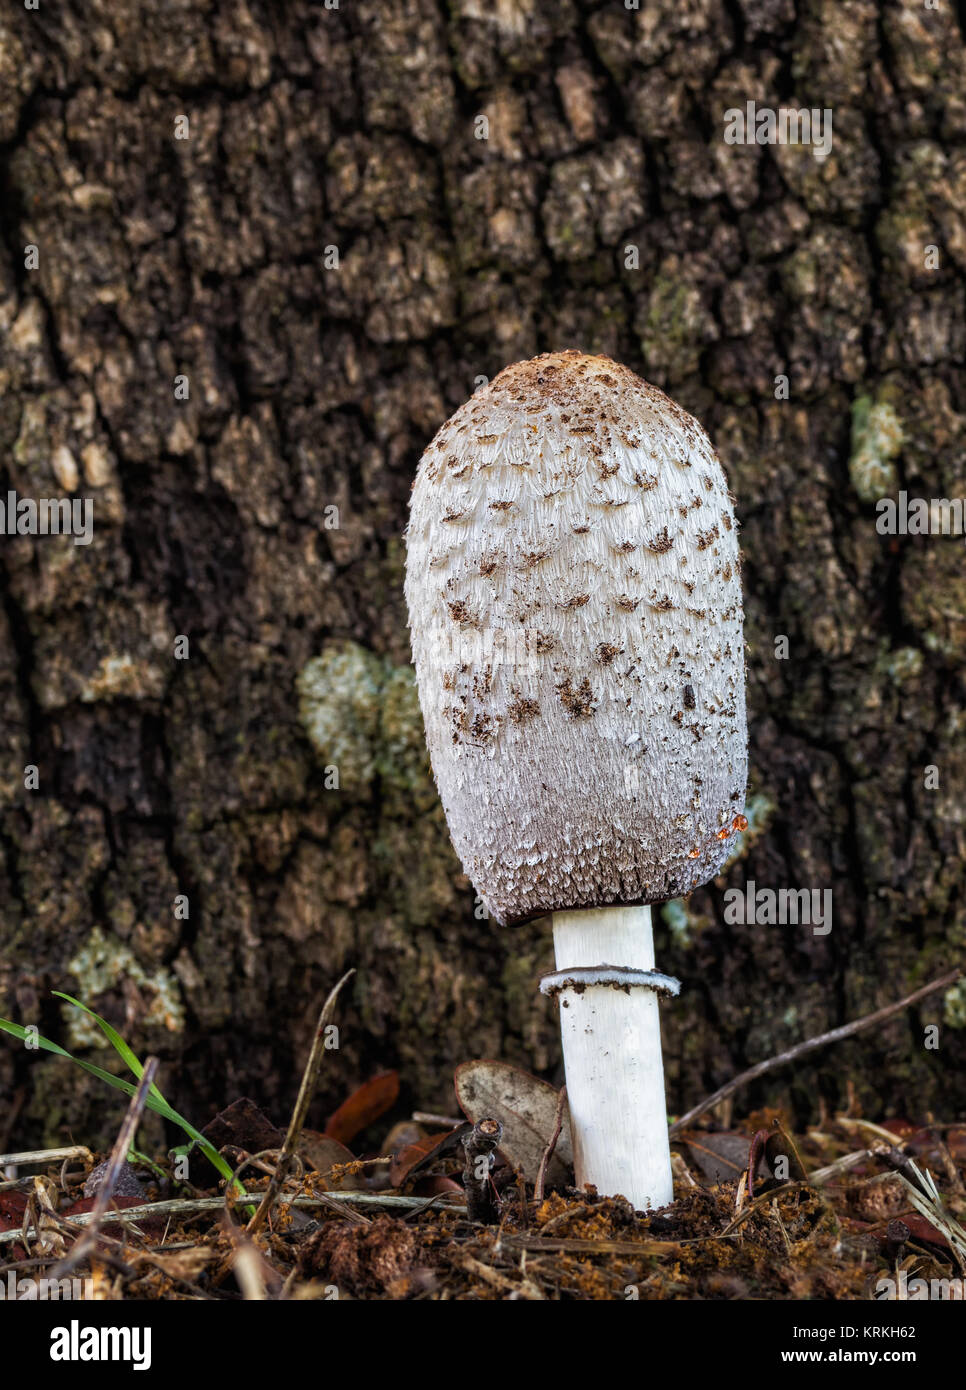 Mushroom photographed in their natural environment. Stock Photo